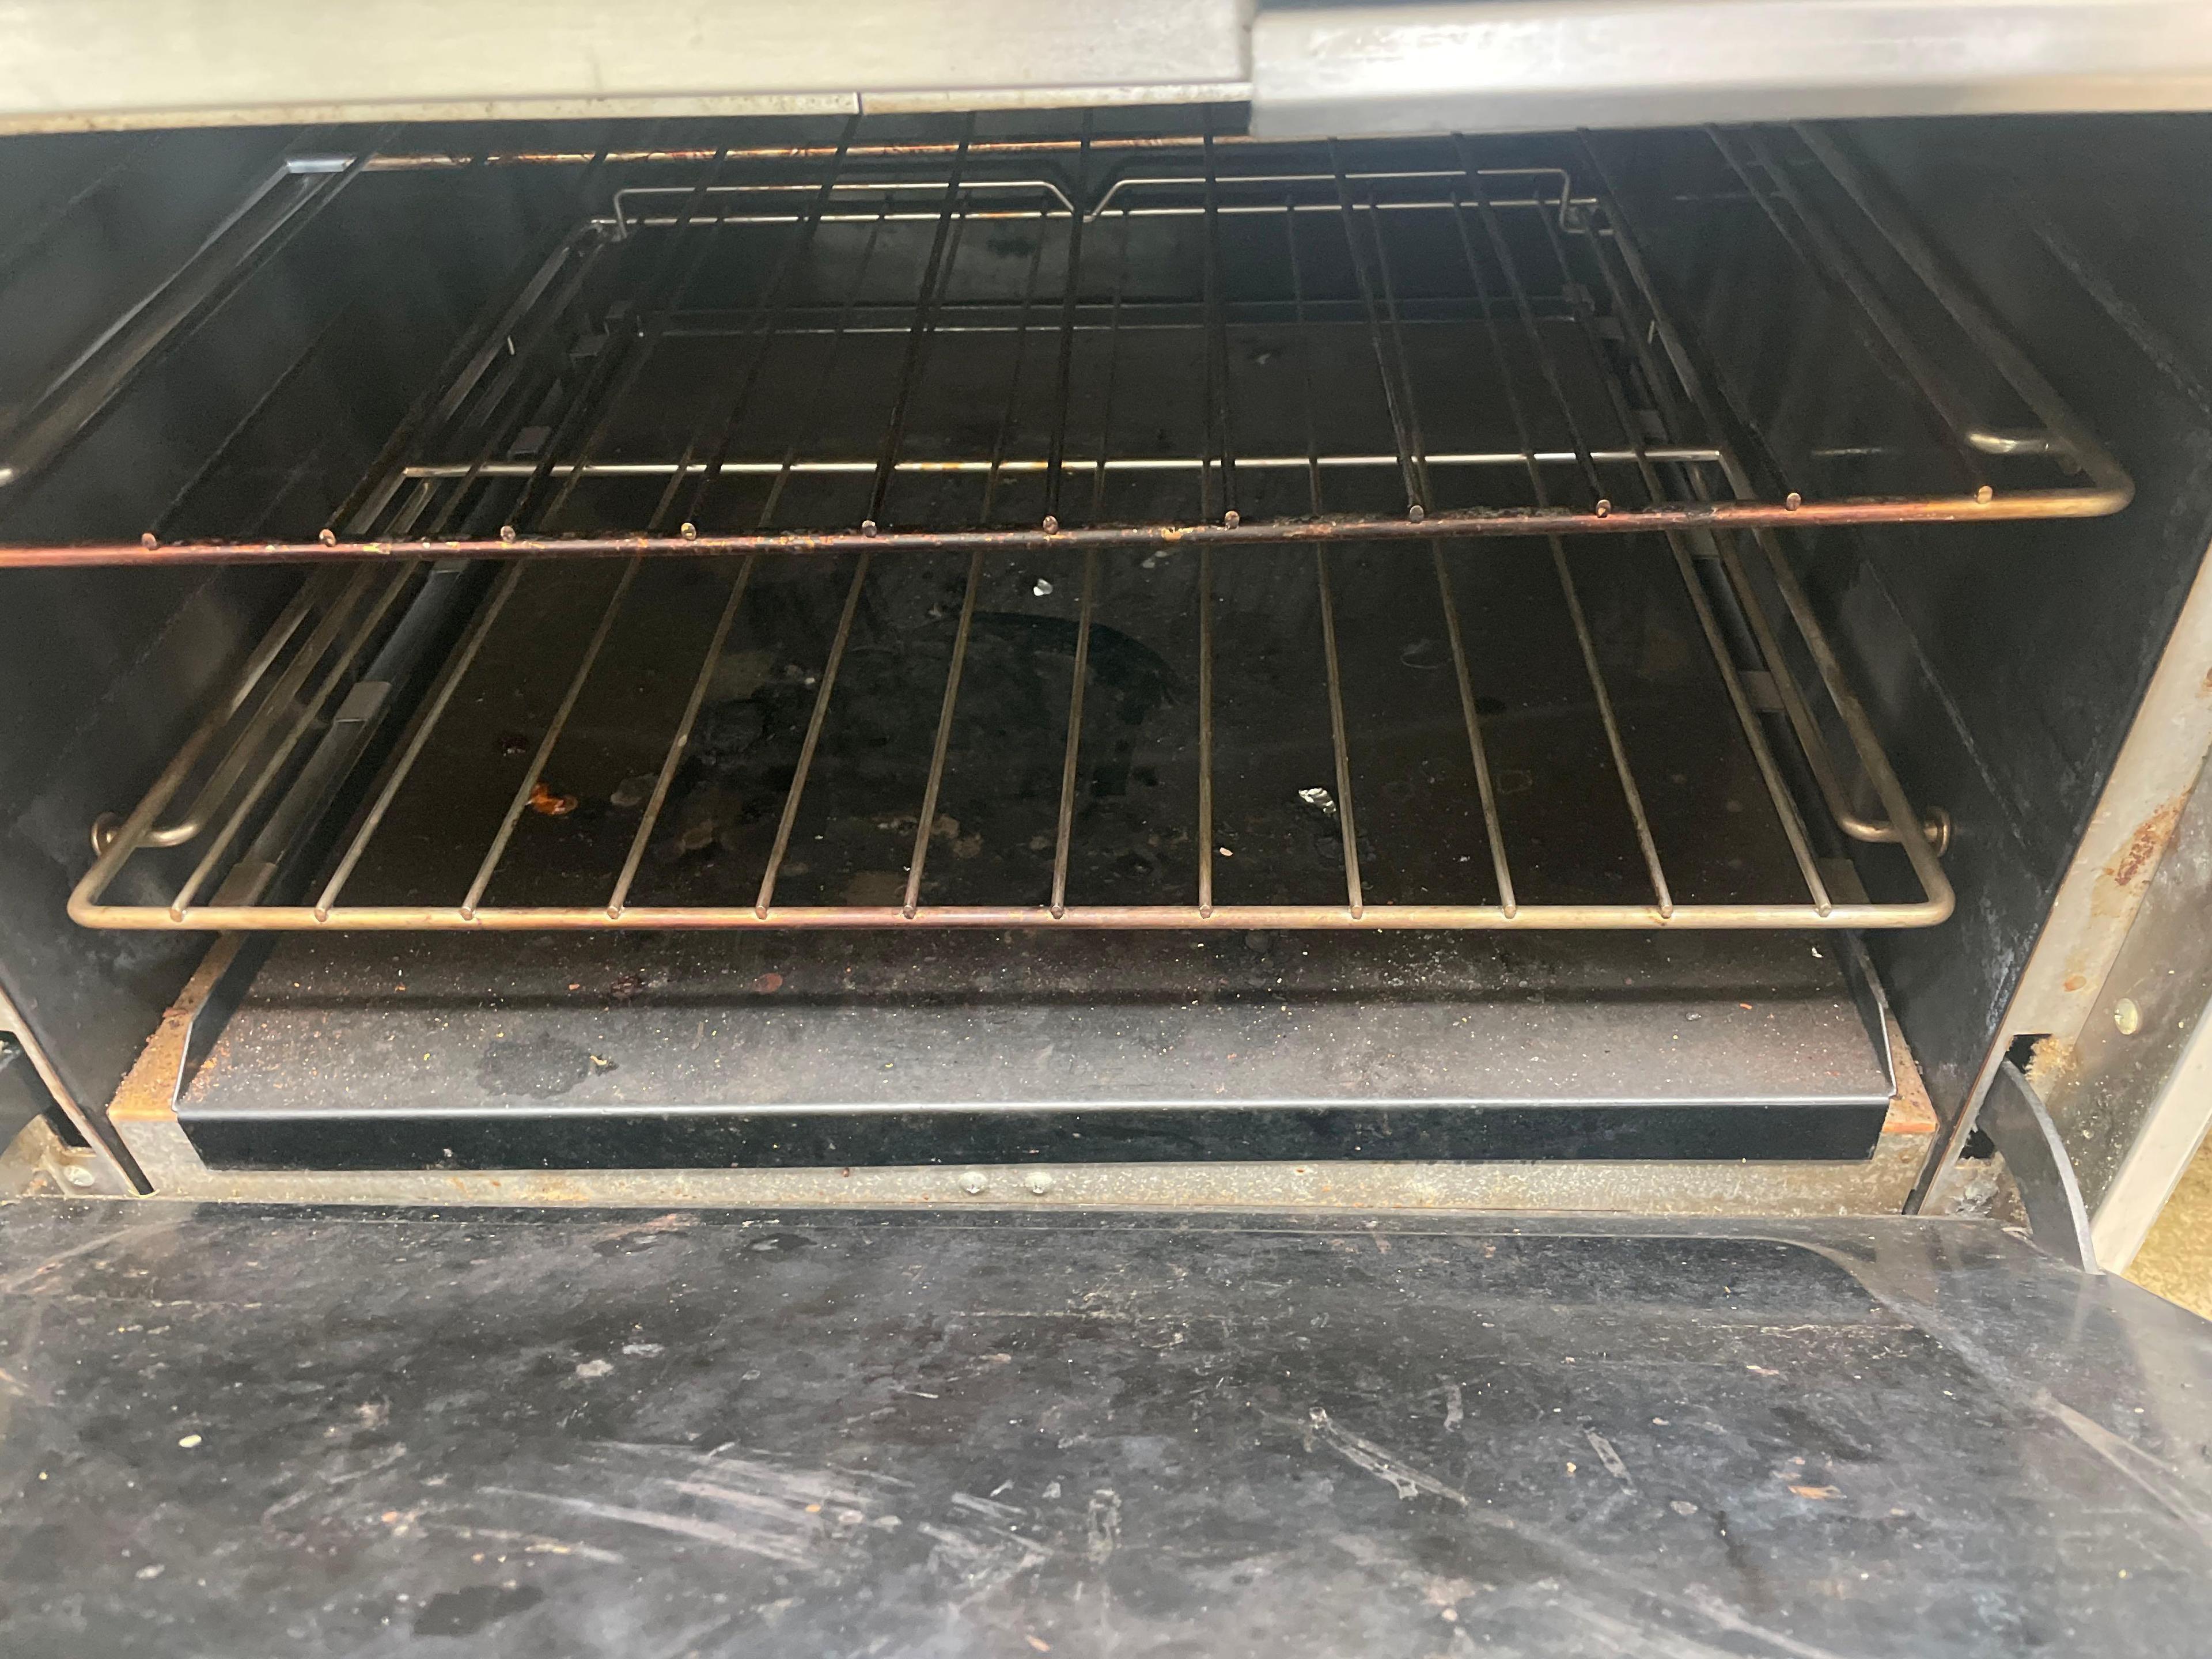 2016 South Bend model 4601DD-4TL gas range with griddle, 60 1/2" Long x 34" wide, very clean and in